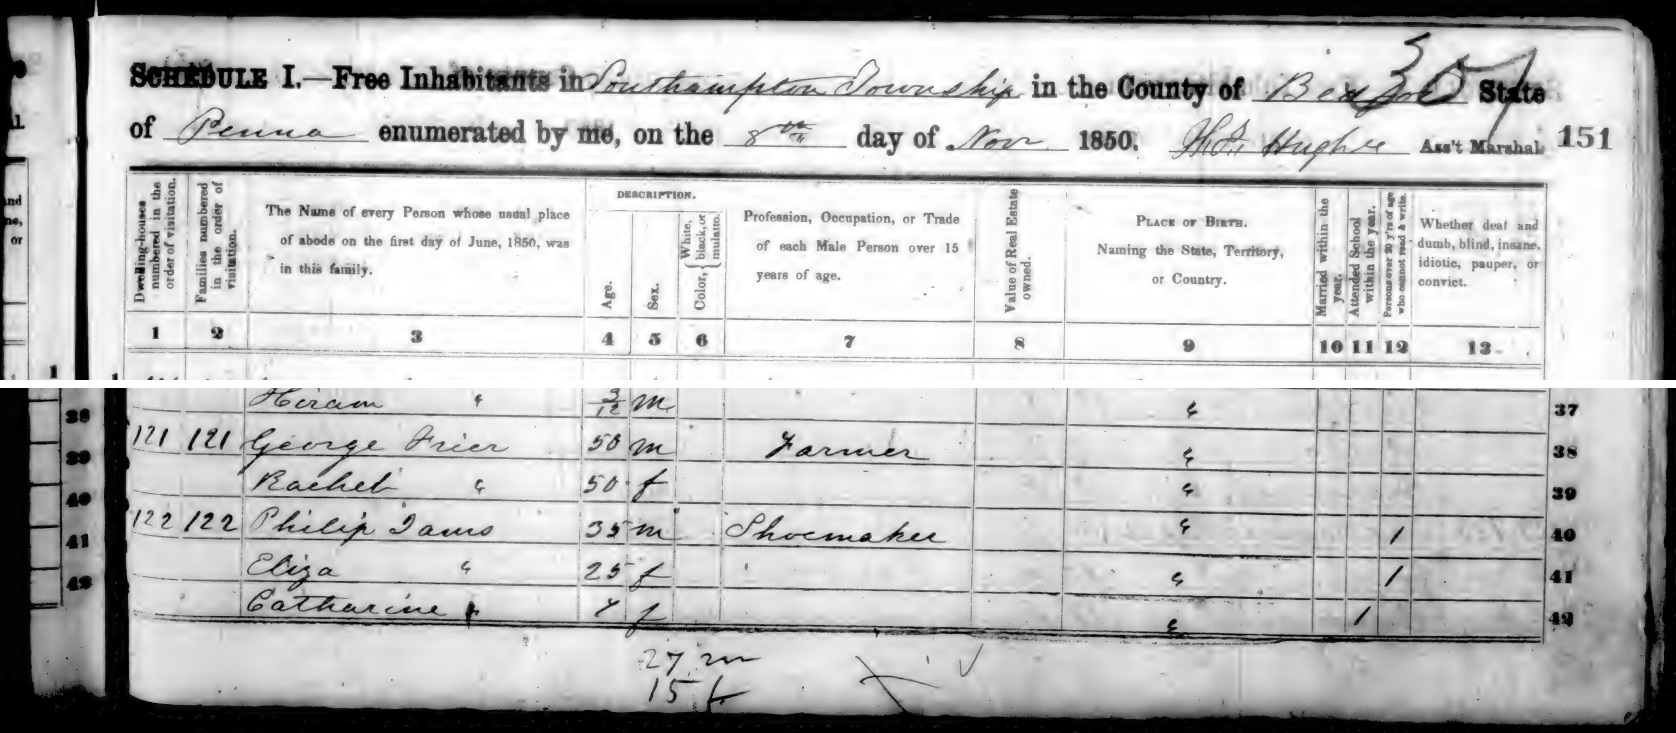 George Frier in 1850 census records of Southampton Township, Bedford County, Pennsylvania.